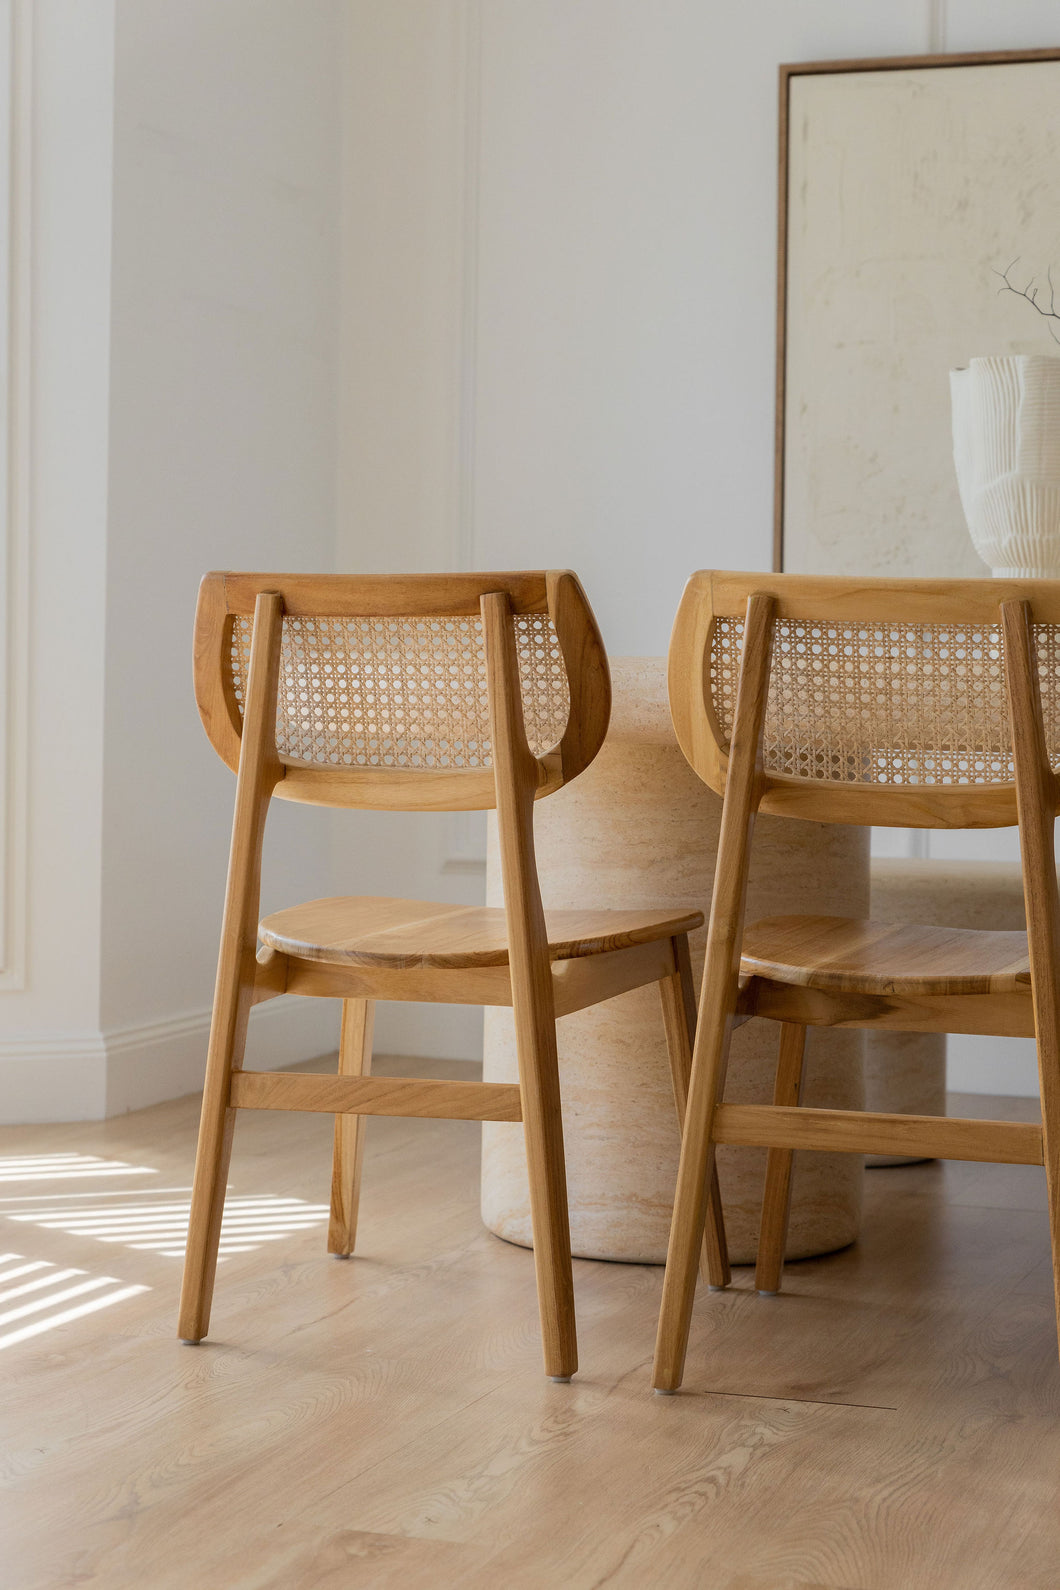 The Charlie dining chair